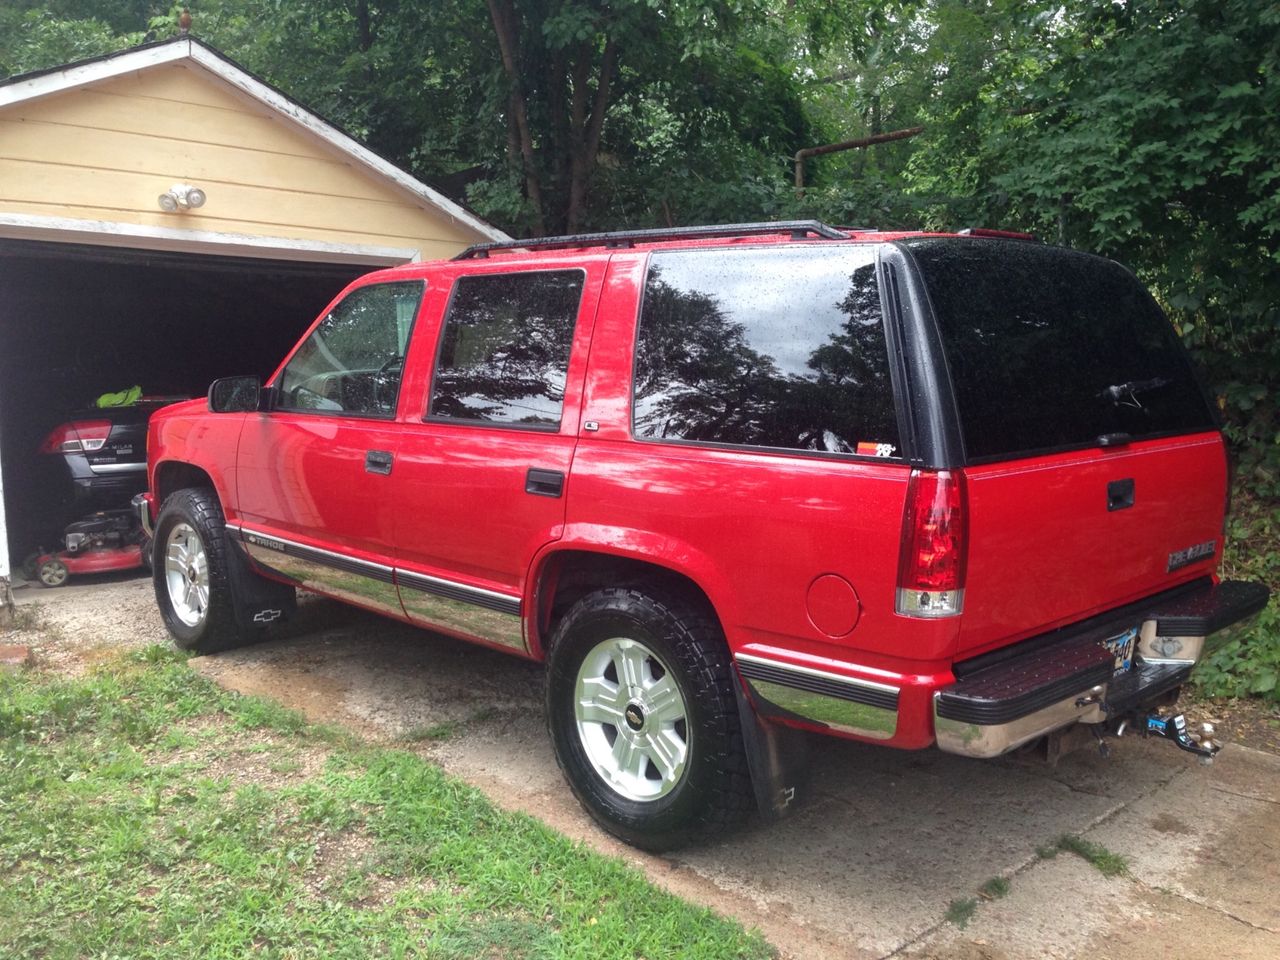 1999 Chevrolet Tahoe LS | Sioux Falls, SD, Victory Red (Red & Orange), 4 Wheel